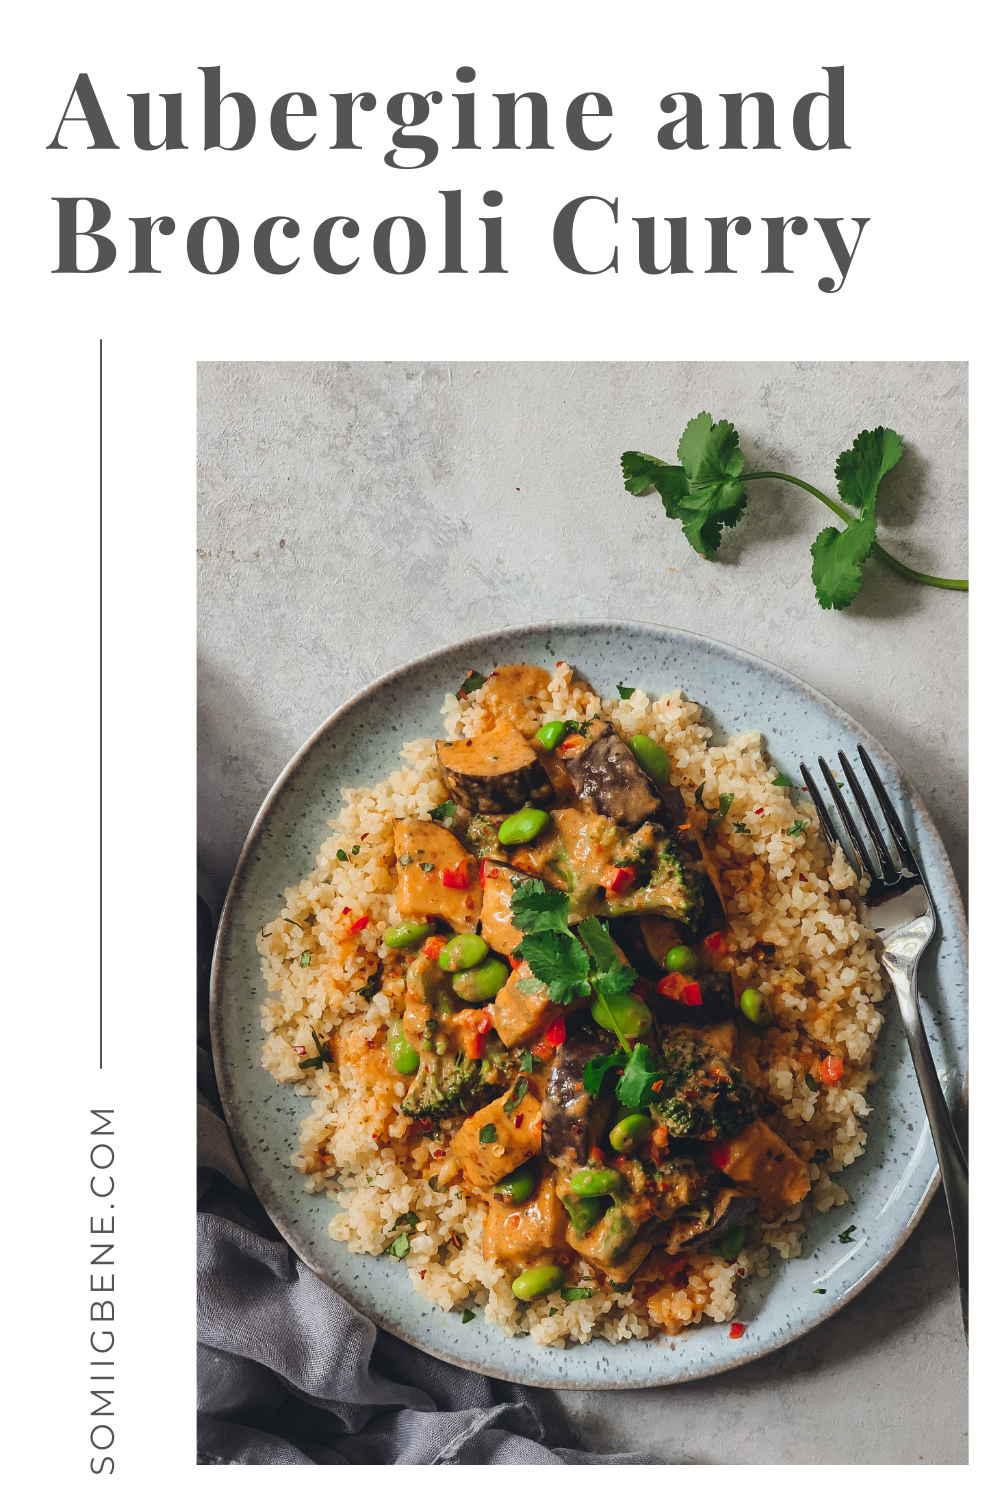 Aubergine and broccoli curry pin